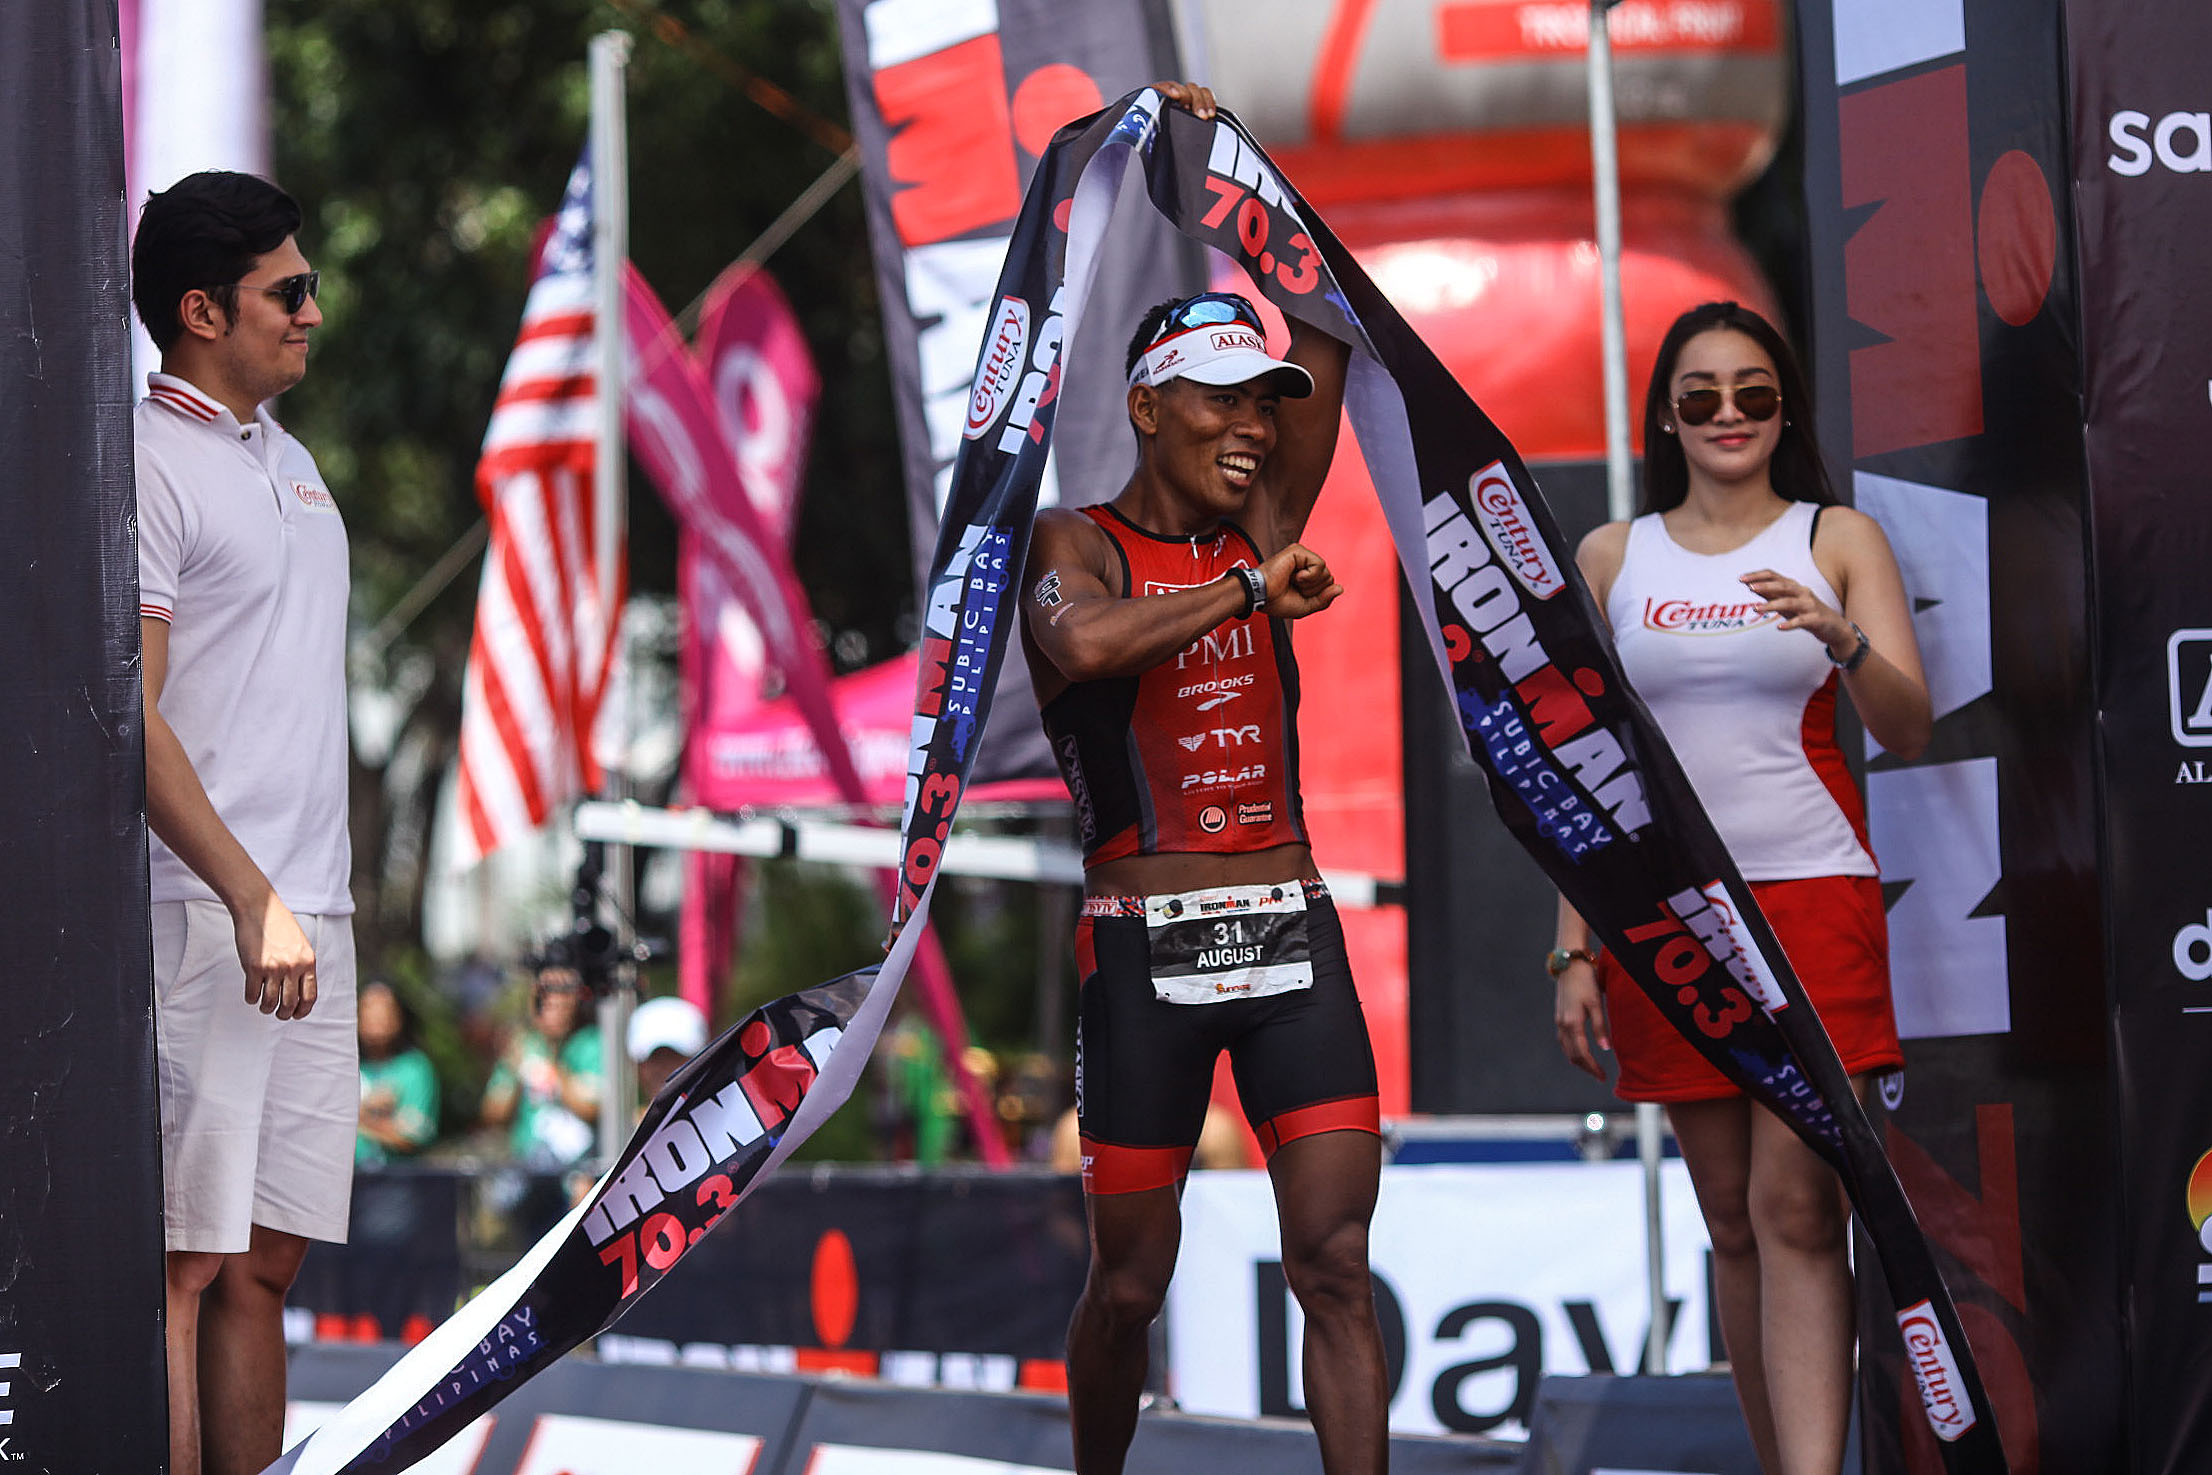 August Benedicto wins the 2017 Century Tuna Ironman 70.3 Subic Bay Asian male elite category. CONTRIBUTED PHOTO